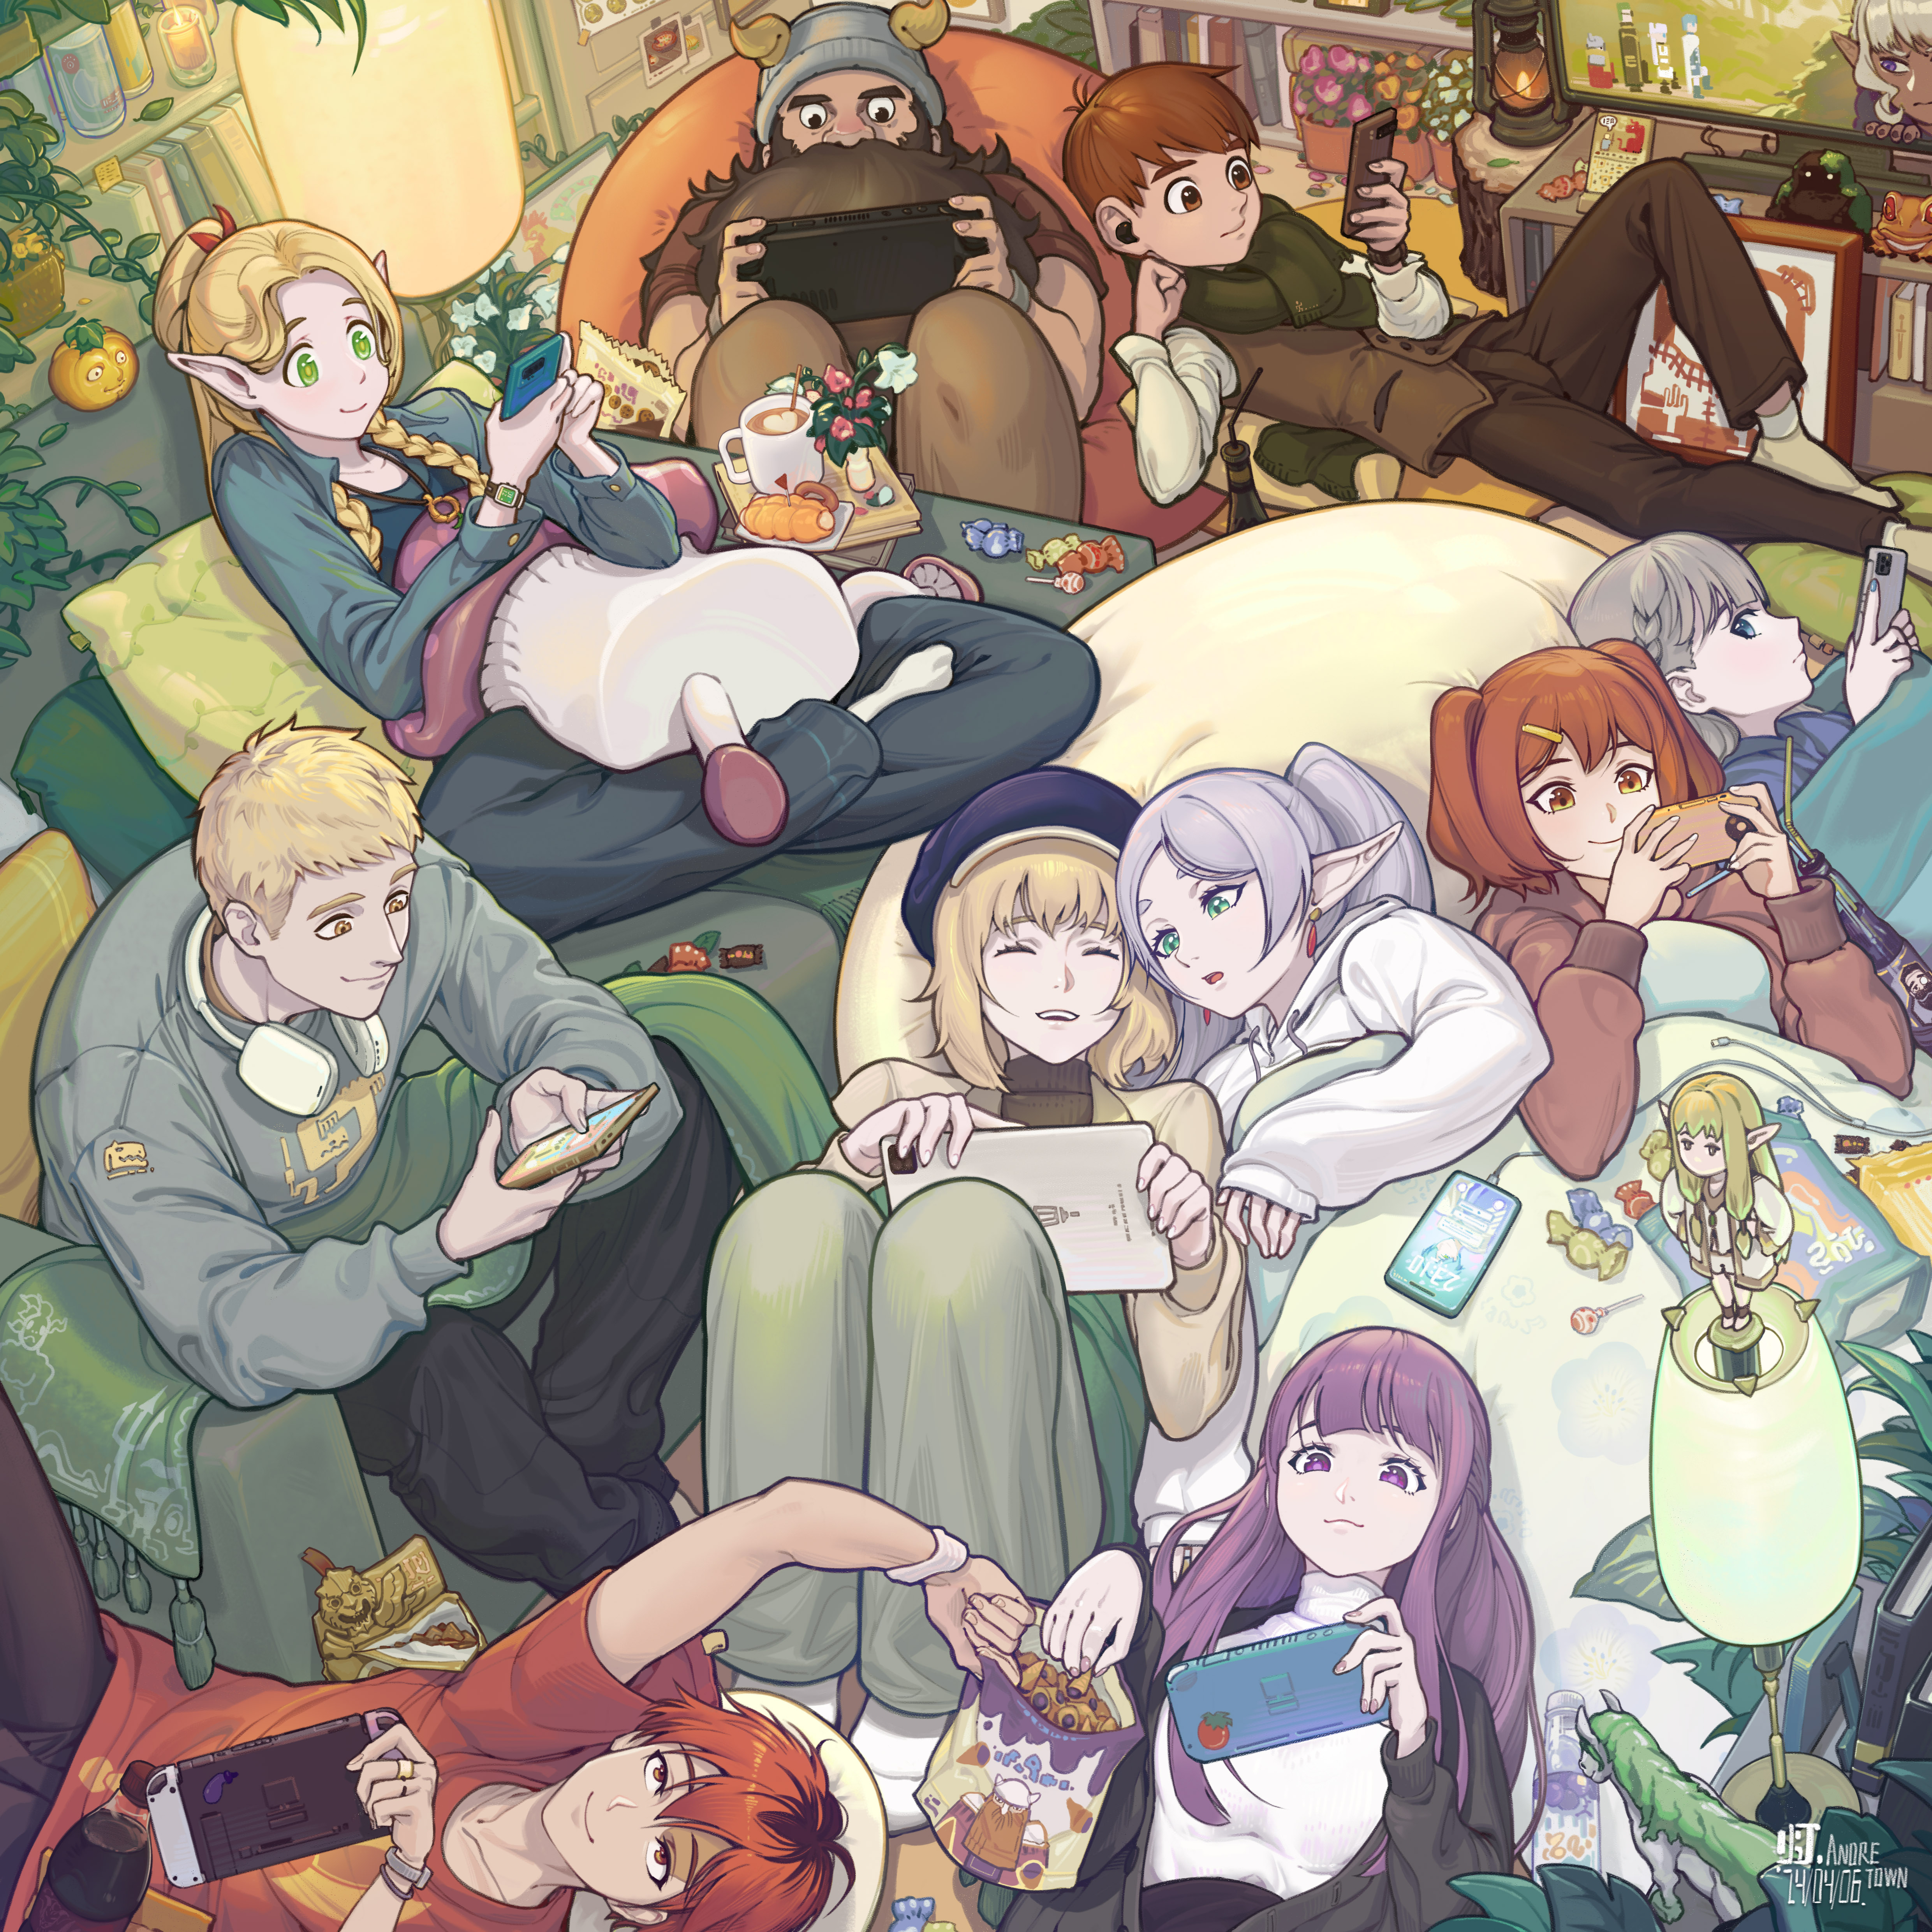 Anime 4961x4961 Sousou No Frieren Frieren Delicious in Dungeon can Fern (Sousou No Frieren) Stark (Sousou no Frieren) crossover Marcille Donato Chilchuck Tims lying down Senshi (Delicious in Dungeon) Thistle (Delicious in Dungeon) Kanne (Sousou no Frieren) Lawine (Sousou no Frieren) Laios Thorden candy group of women sitting Walking Mushroom food Sissel (Delicious in Dungeon) Serie (Sousou no Frieren) anime girls anime boys lying on back Nintendo DS indoors smartphone Andretown headphones looking at smartphone plants drink elves